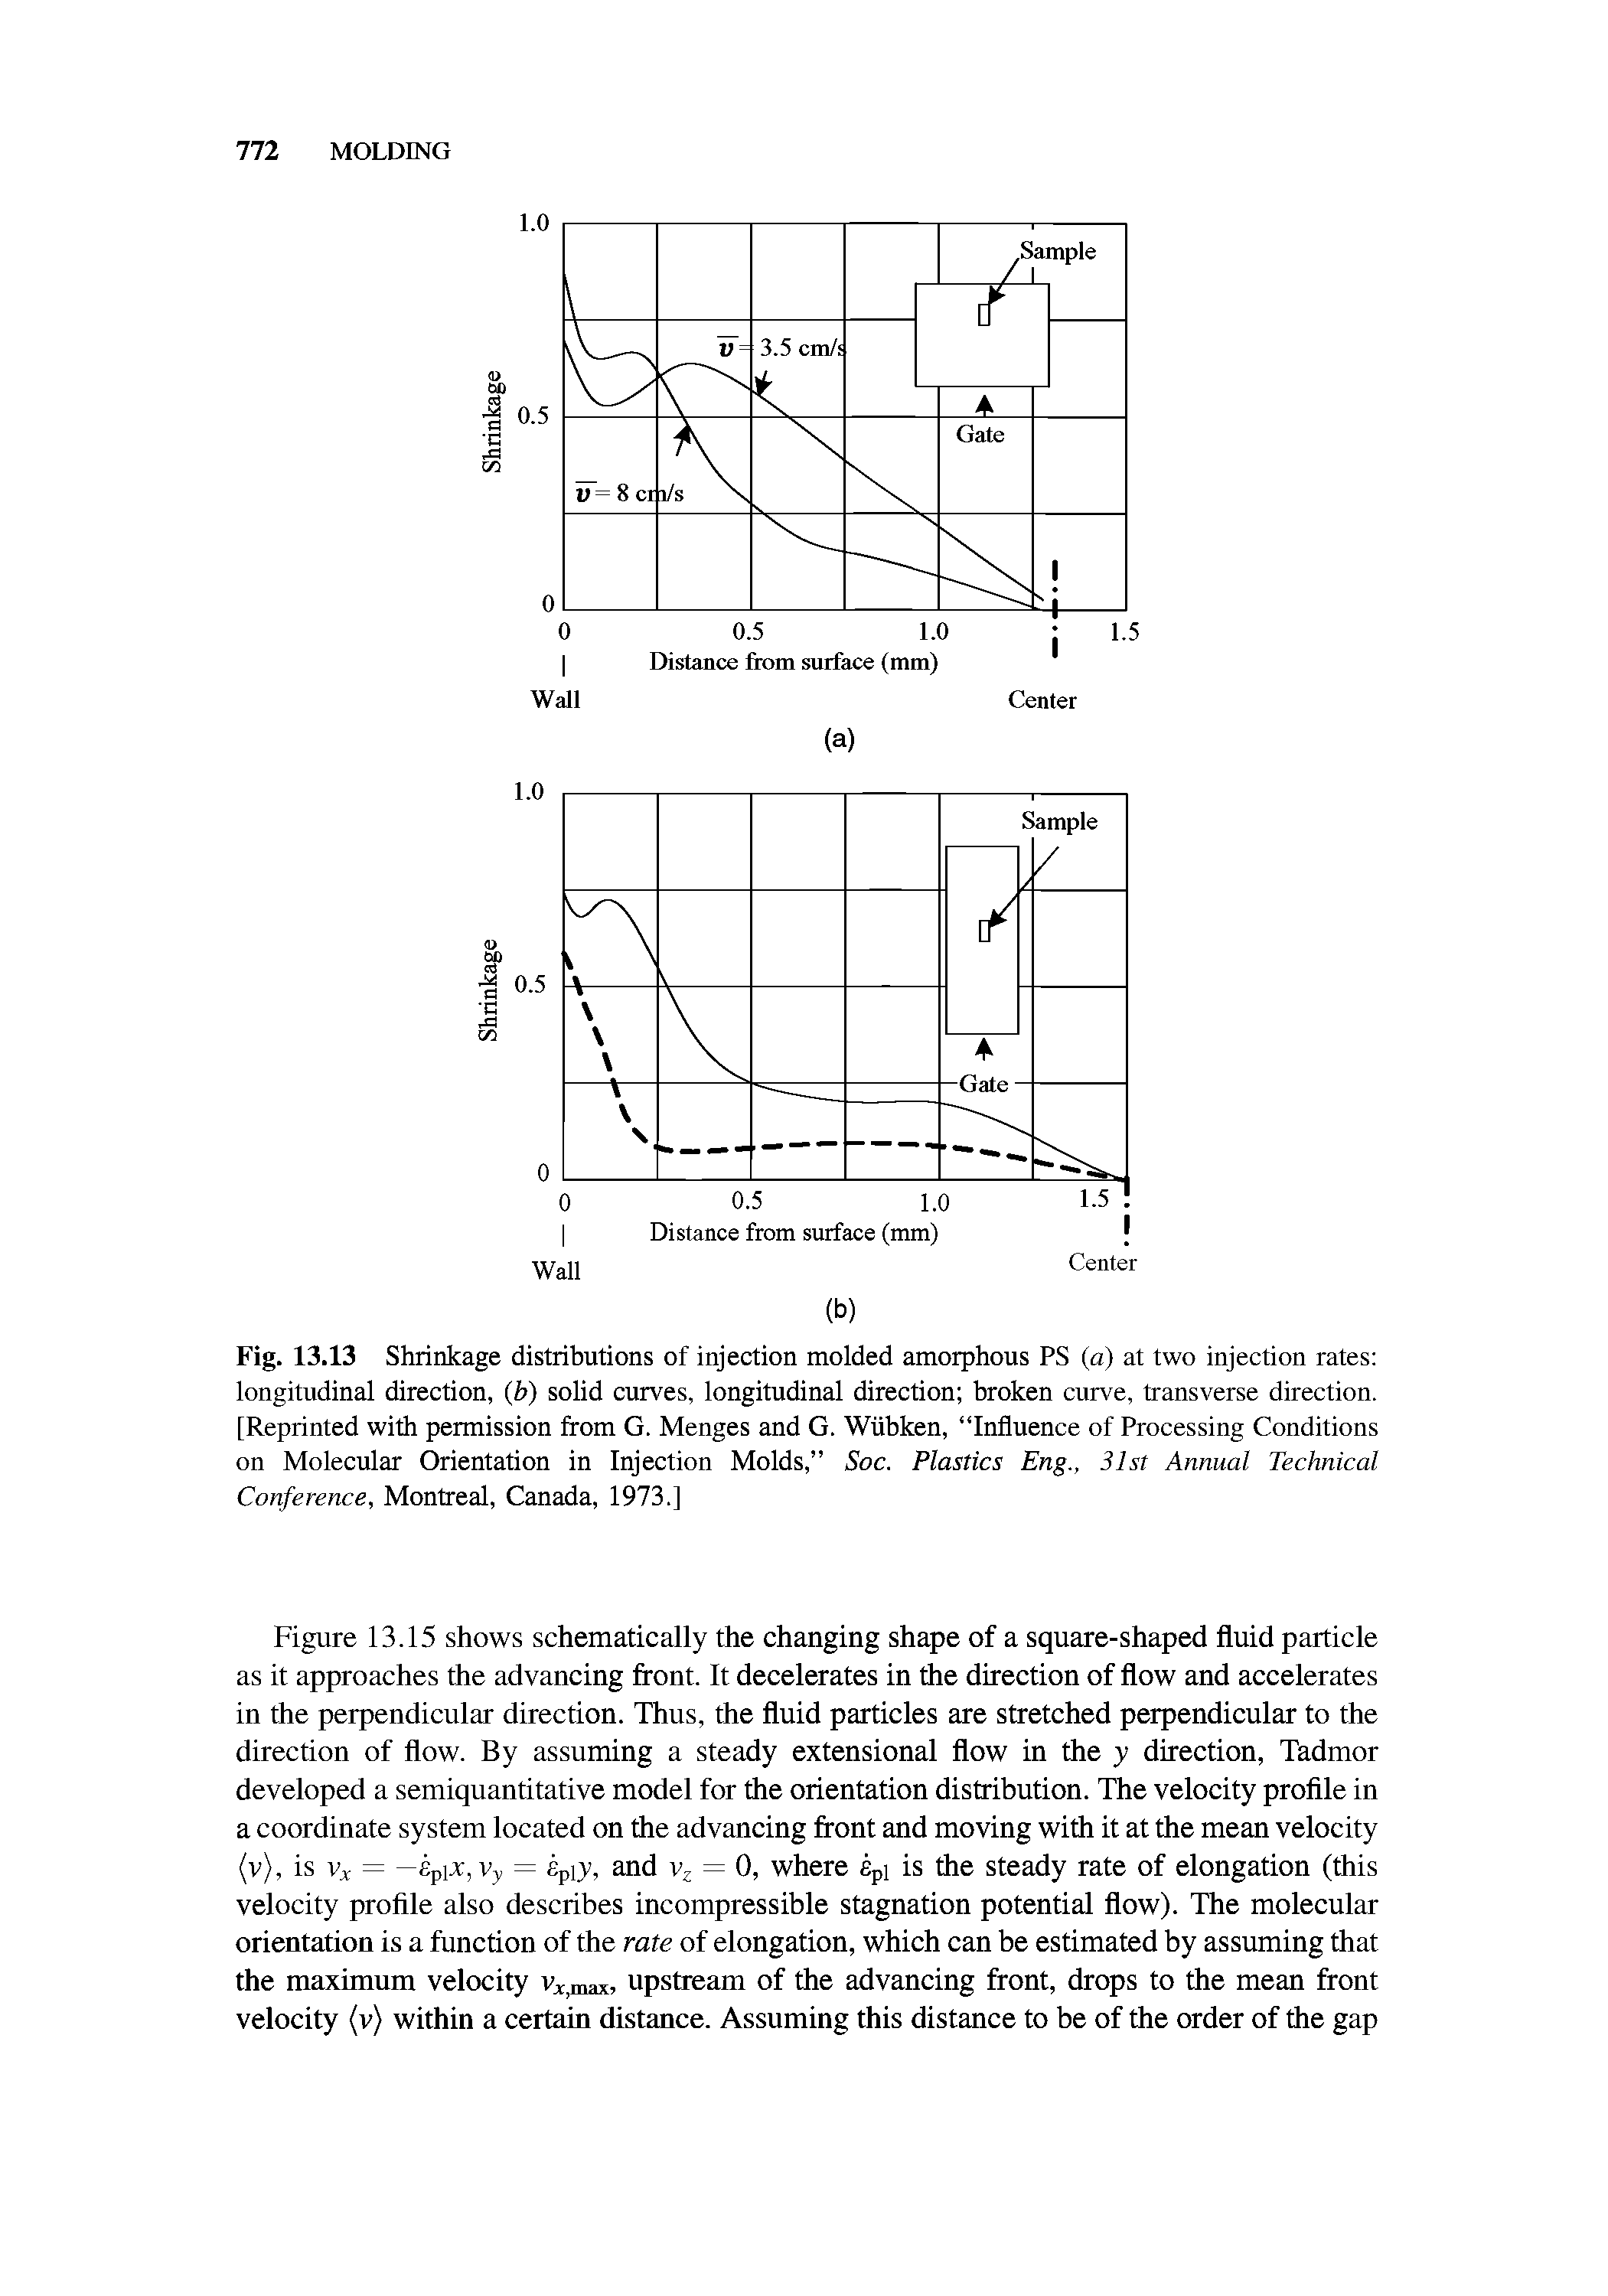 Fig. 13.13 Shrinkage distributions of injection molded amorphous PS (a) at two injection rates longitudinal direction, (b) solid curves, longitudinal direction broken curve, transverse direction. [Reprinted with permission from G. Menges and G. Wiibken, Influence of Processing Conditions on Molecular Orientation in Injection Molds, Soc. Plastics Eng., 31st Annual Technical Conference, Montreal, Canada, 1973.]...